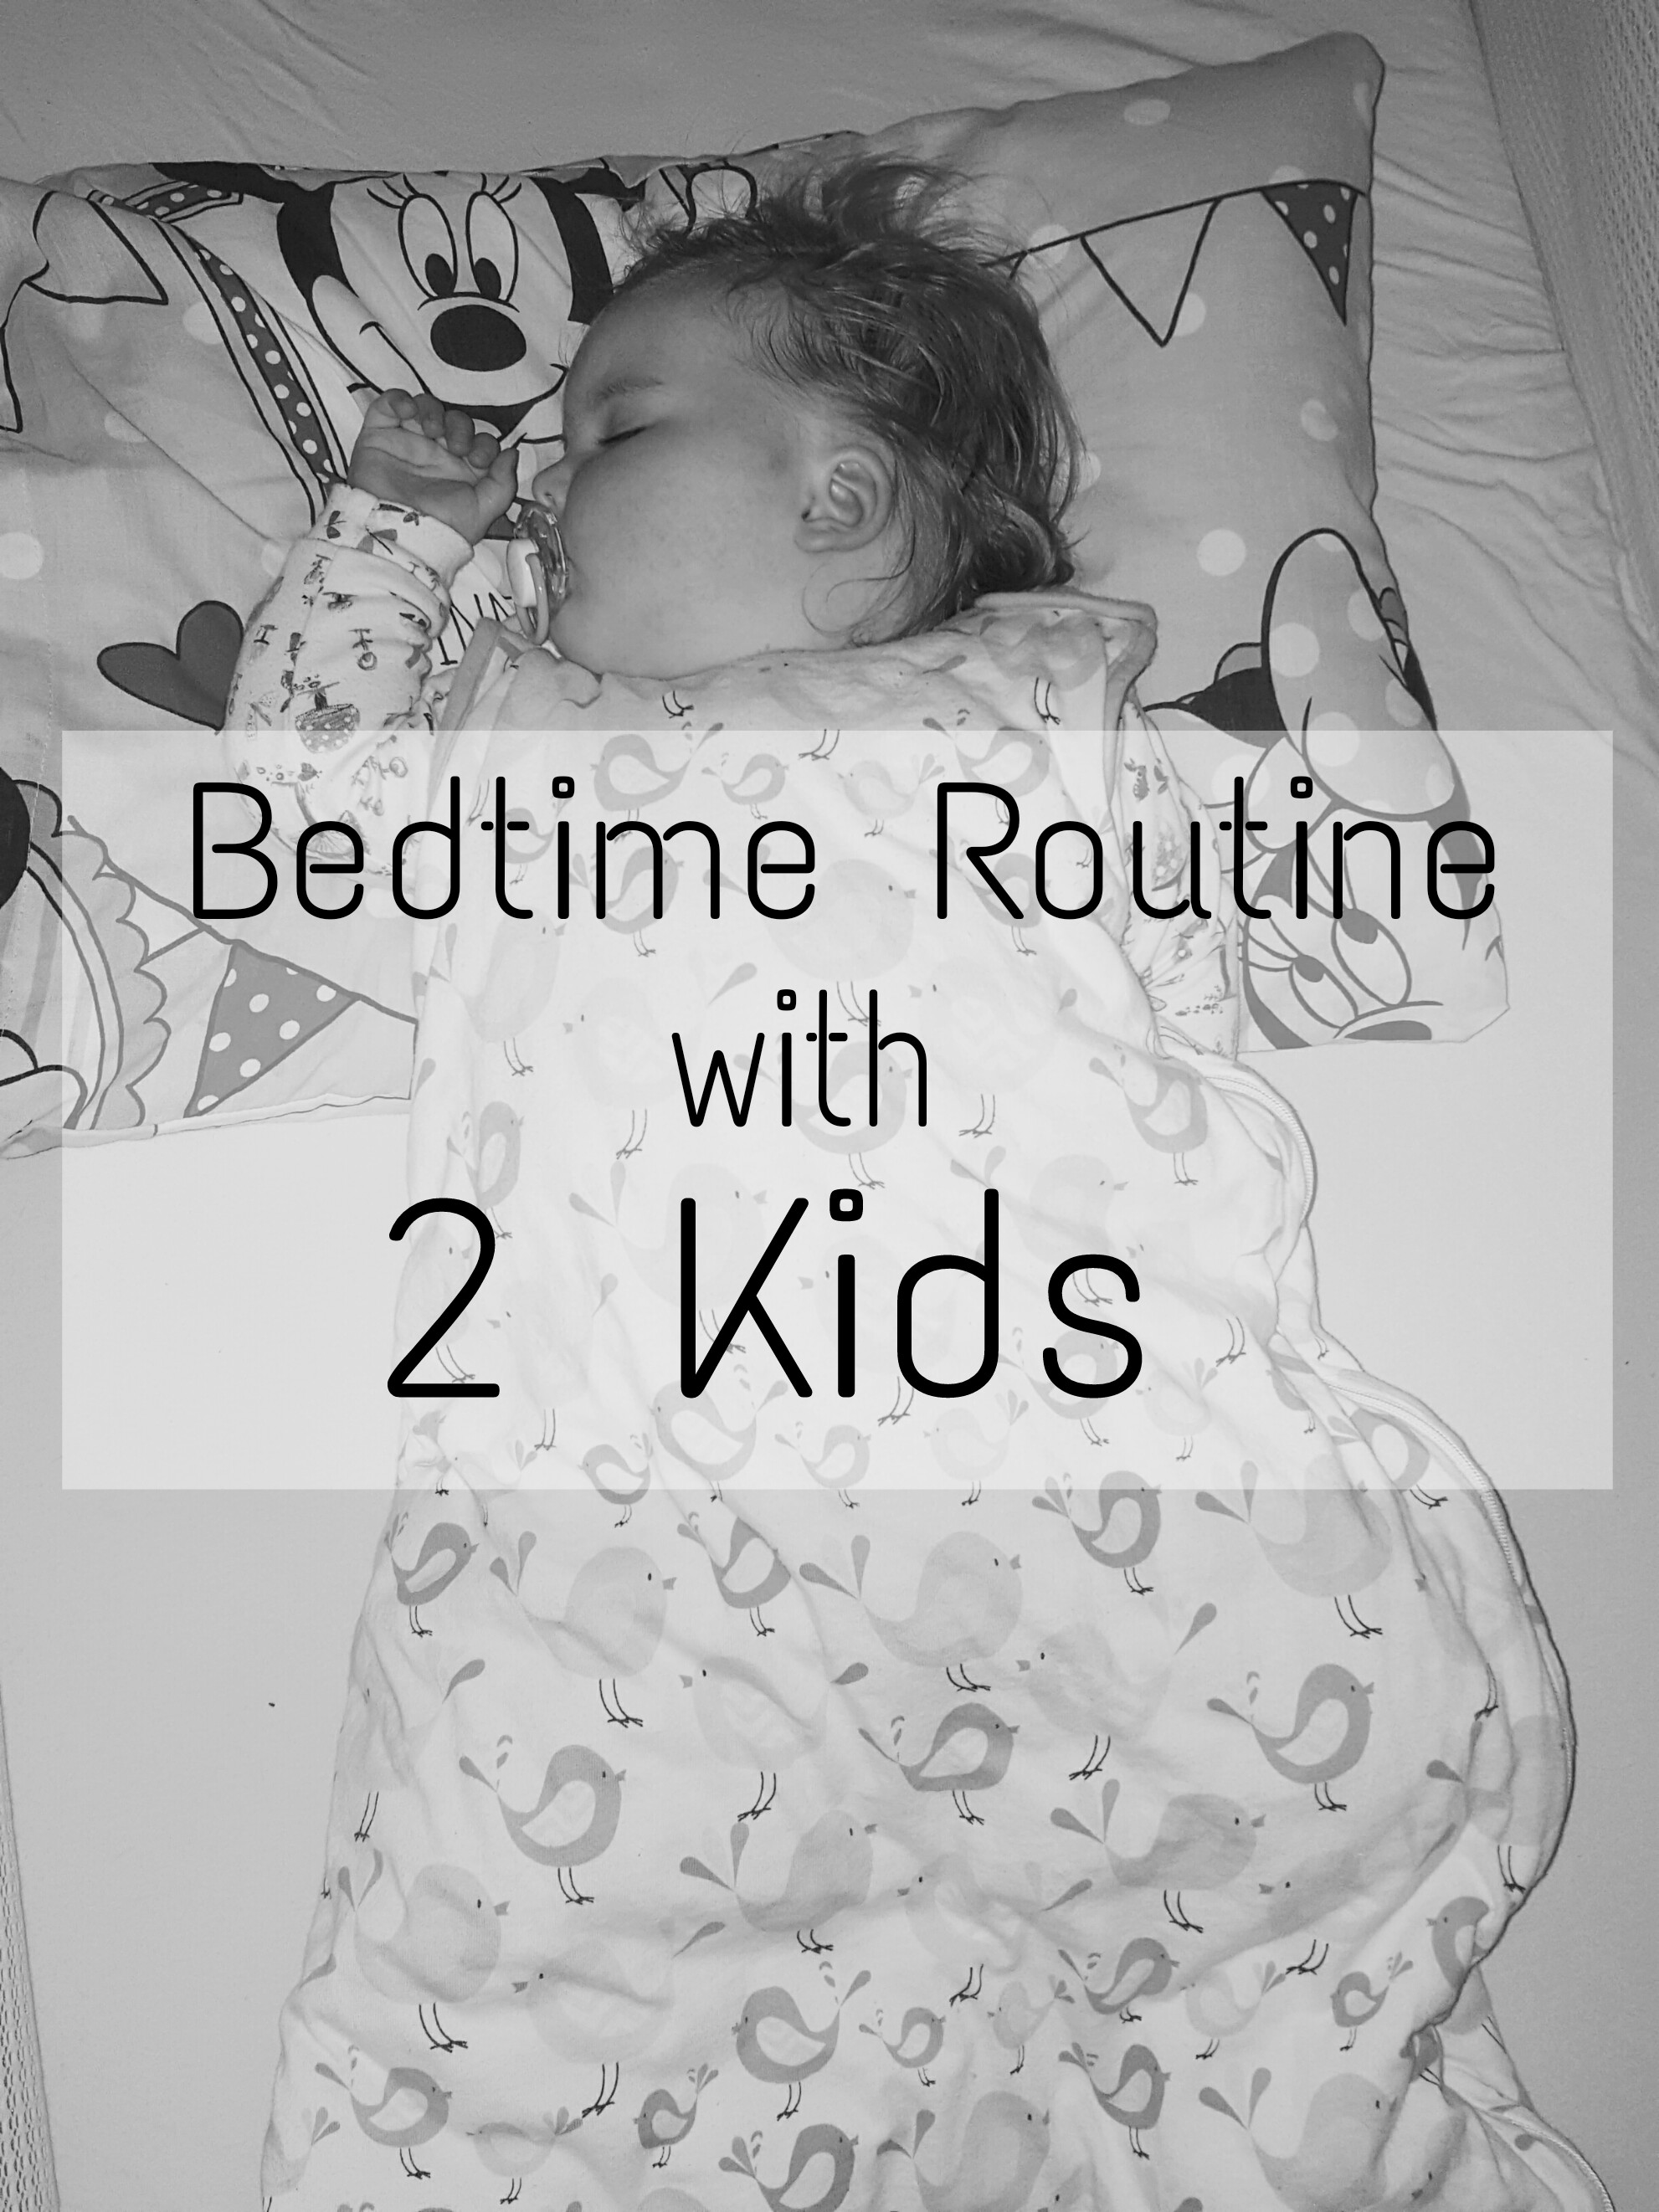 Bedtime Routine with 2 Kids